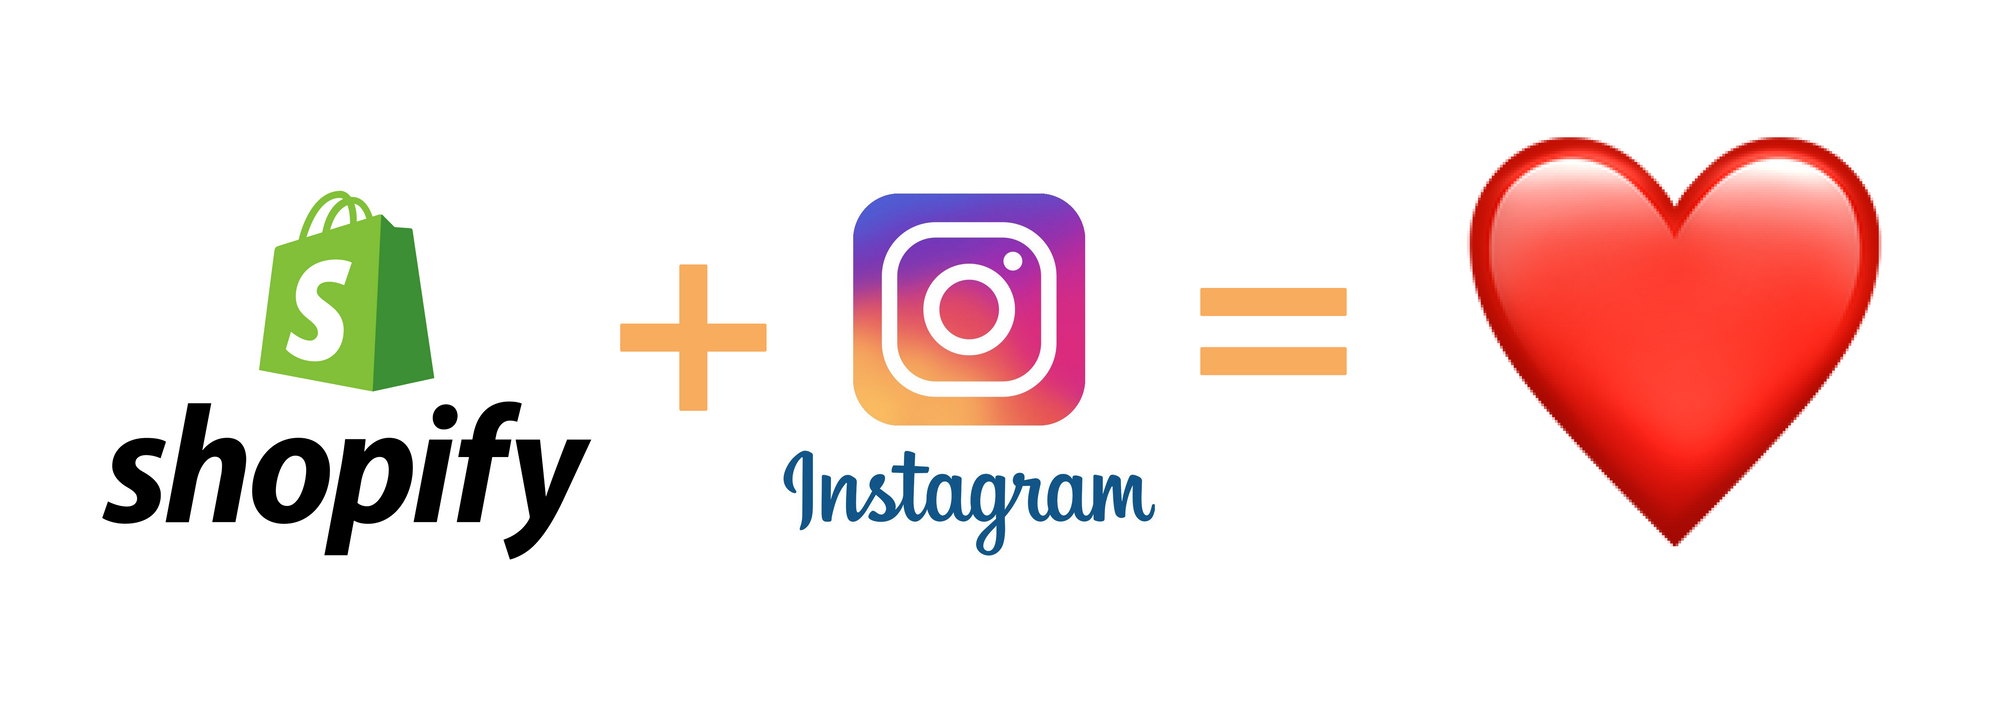 Selling on Instagram with Shopify